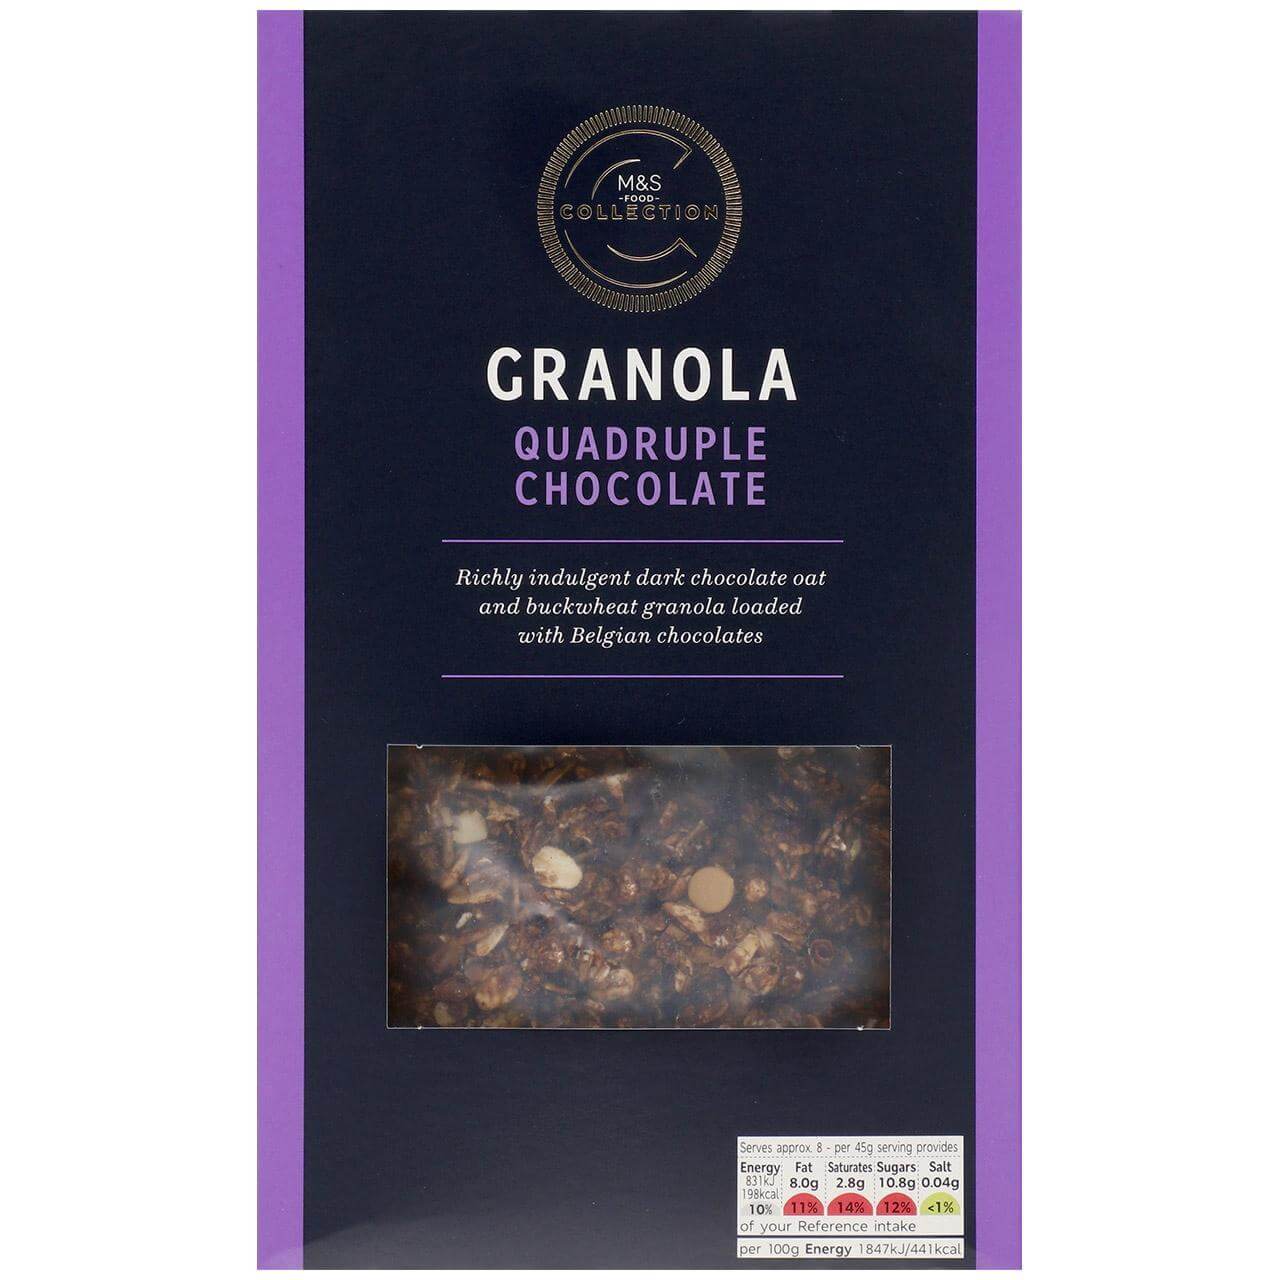 Image of M&S Quadruple Chocolate Granola made in the UK by Marks & Spencer Food. Buying this product supports a UK business, jobs and the local community